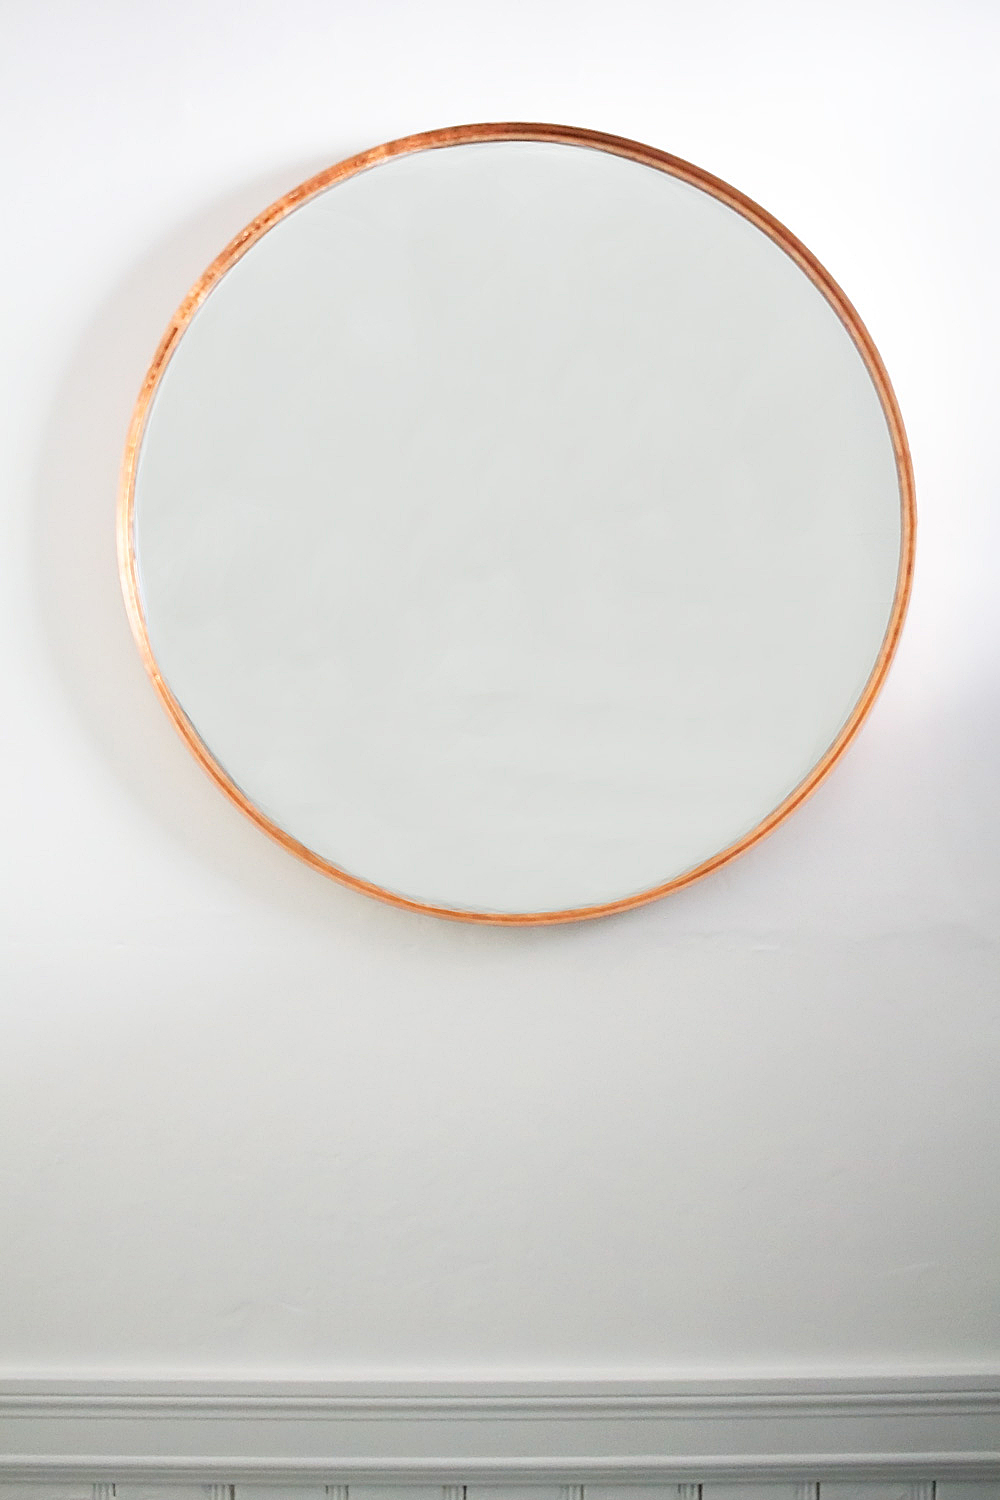 You can turn any plain mirror into a DIY copper mirror on a budget using just copper leaf and a paintbrush. The perfect low-budget craft for a high-end look!